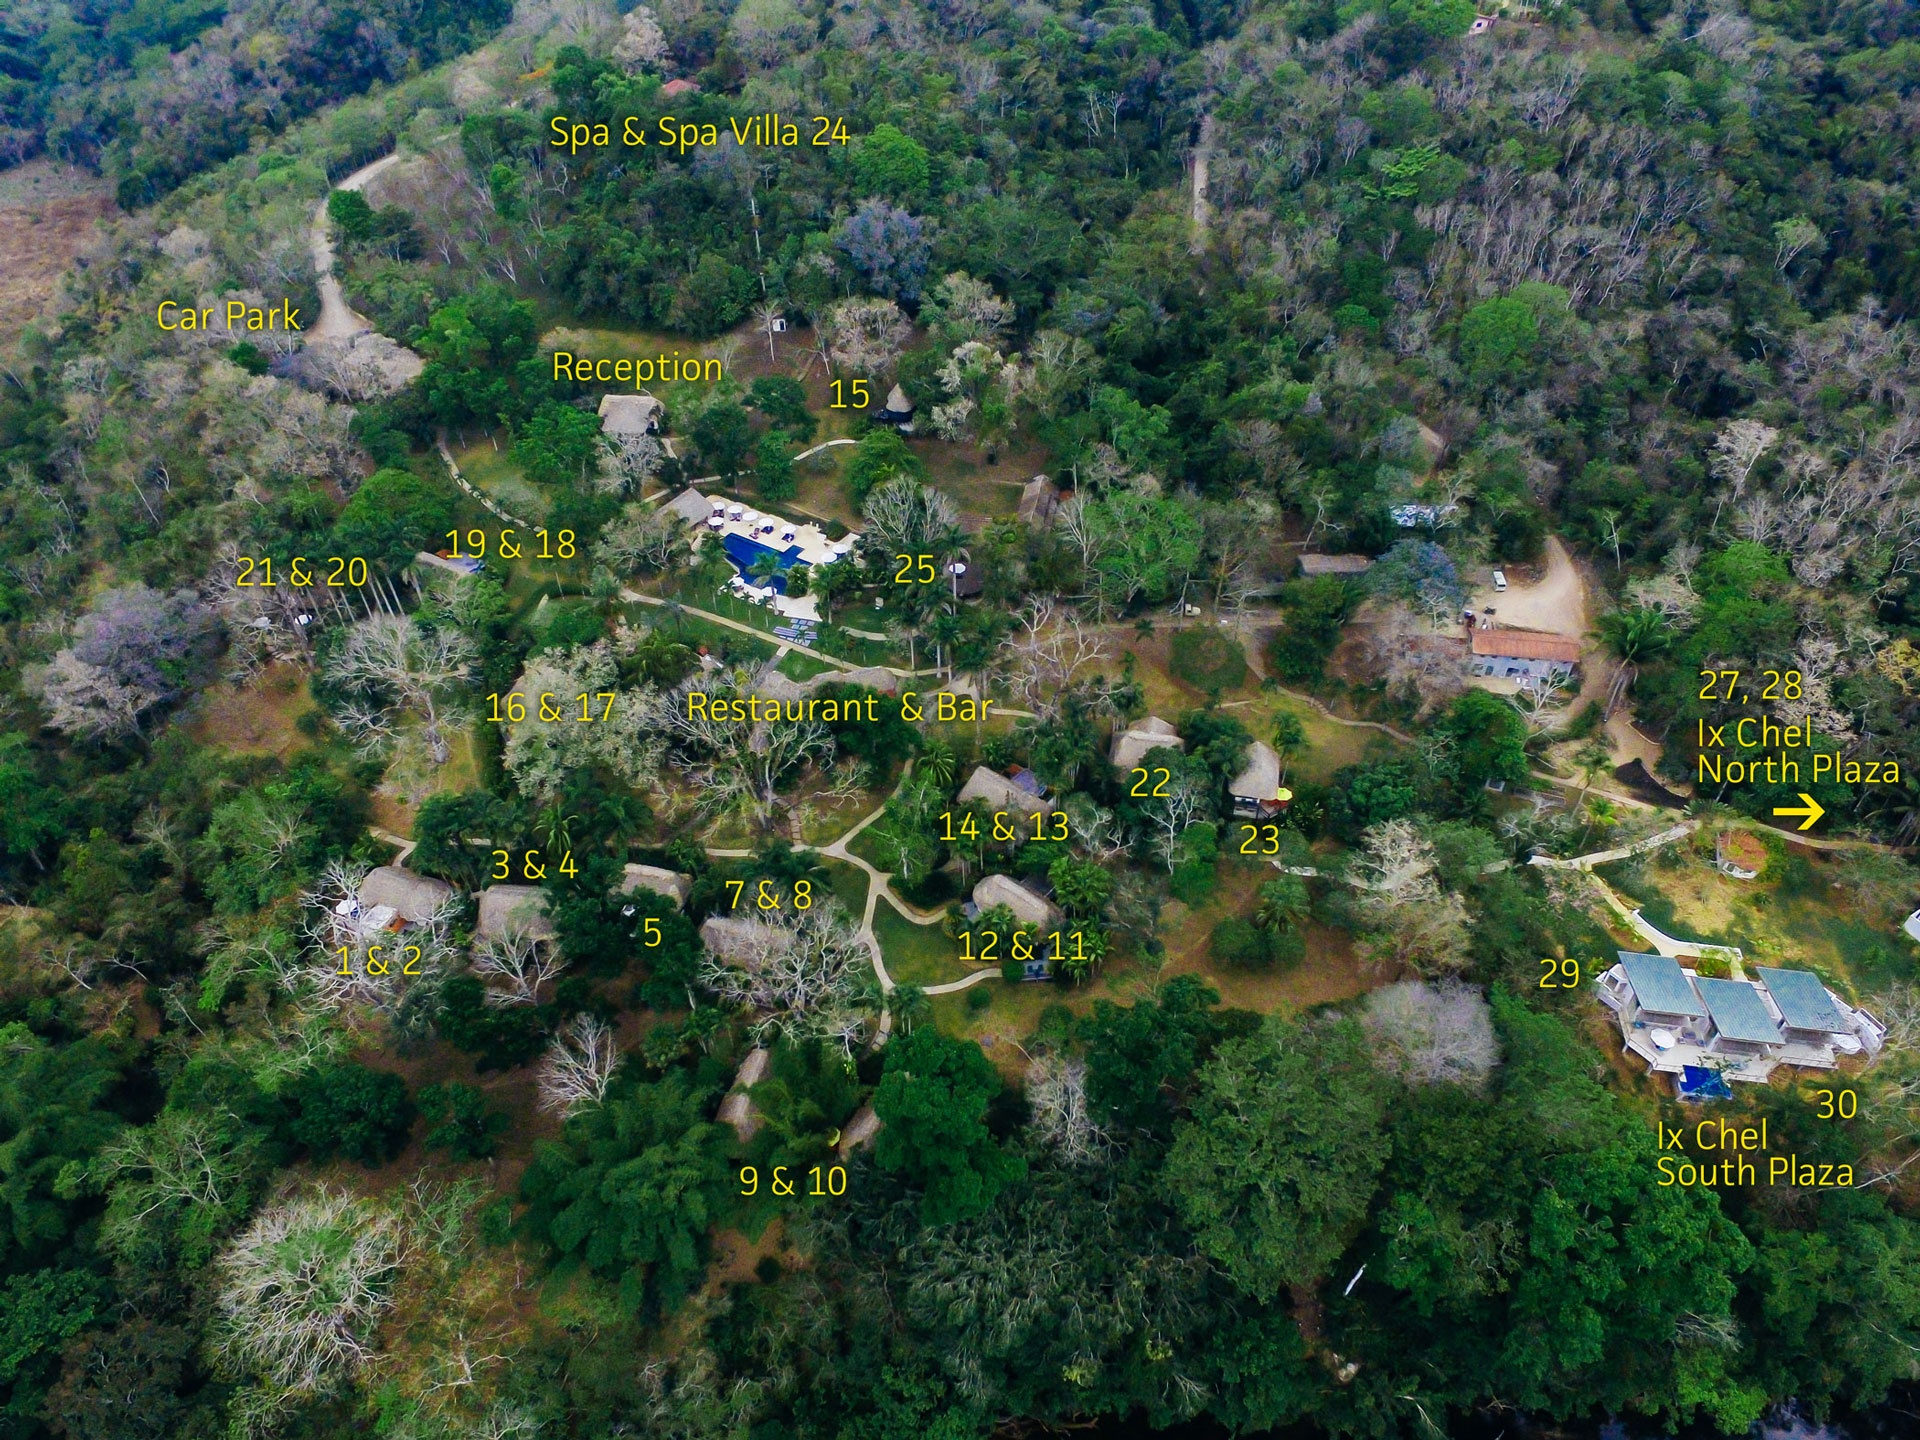 Aerial photograph of The Lodge at Chaa Creek in Belize, with 16 cottage rooms, 3 suites & 5 villas.